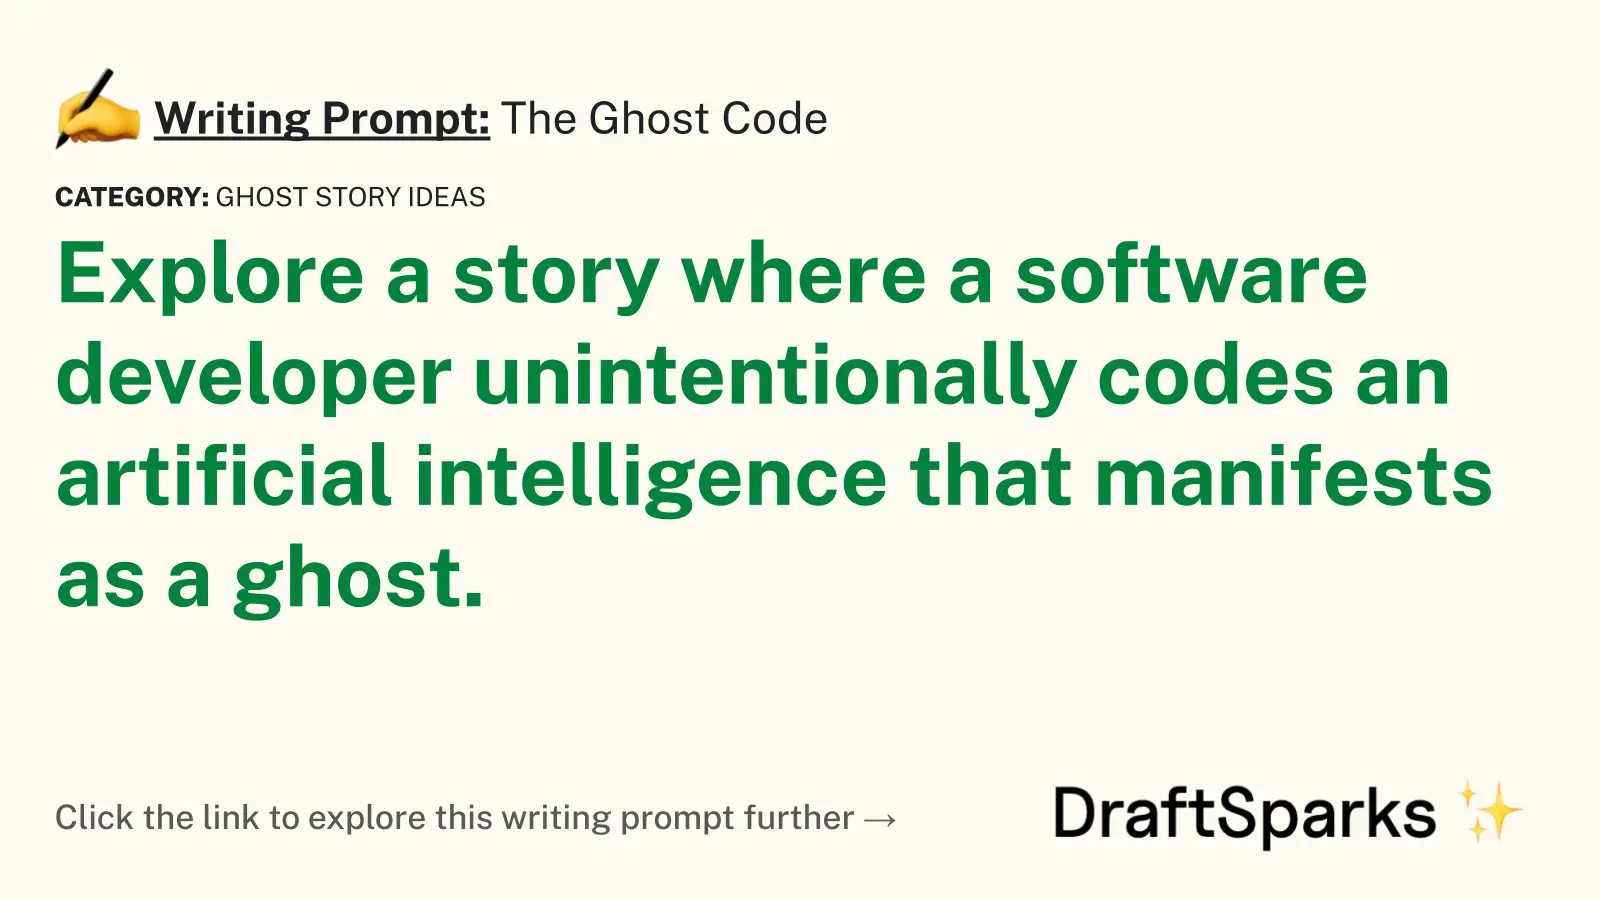 The Ghost Code